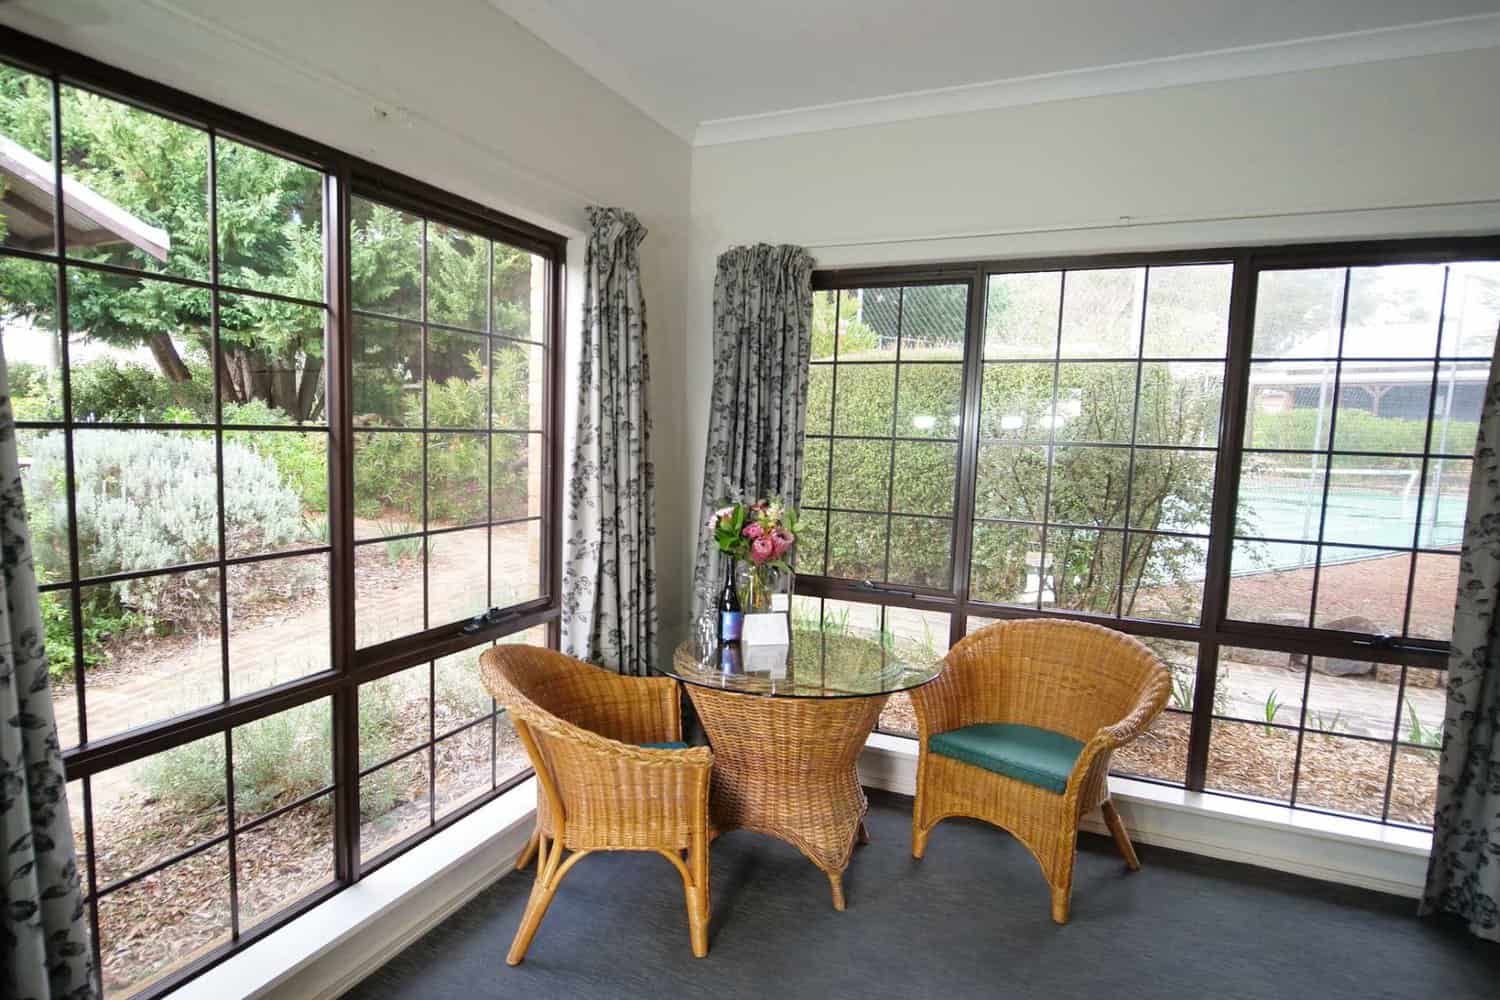 A cozy hotel room corner with a glass table and wicker chairs by a large window, offering a view of the peaceful garden outside, perfect for a relaxing morning or afternoon.